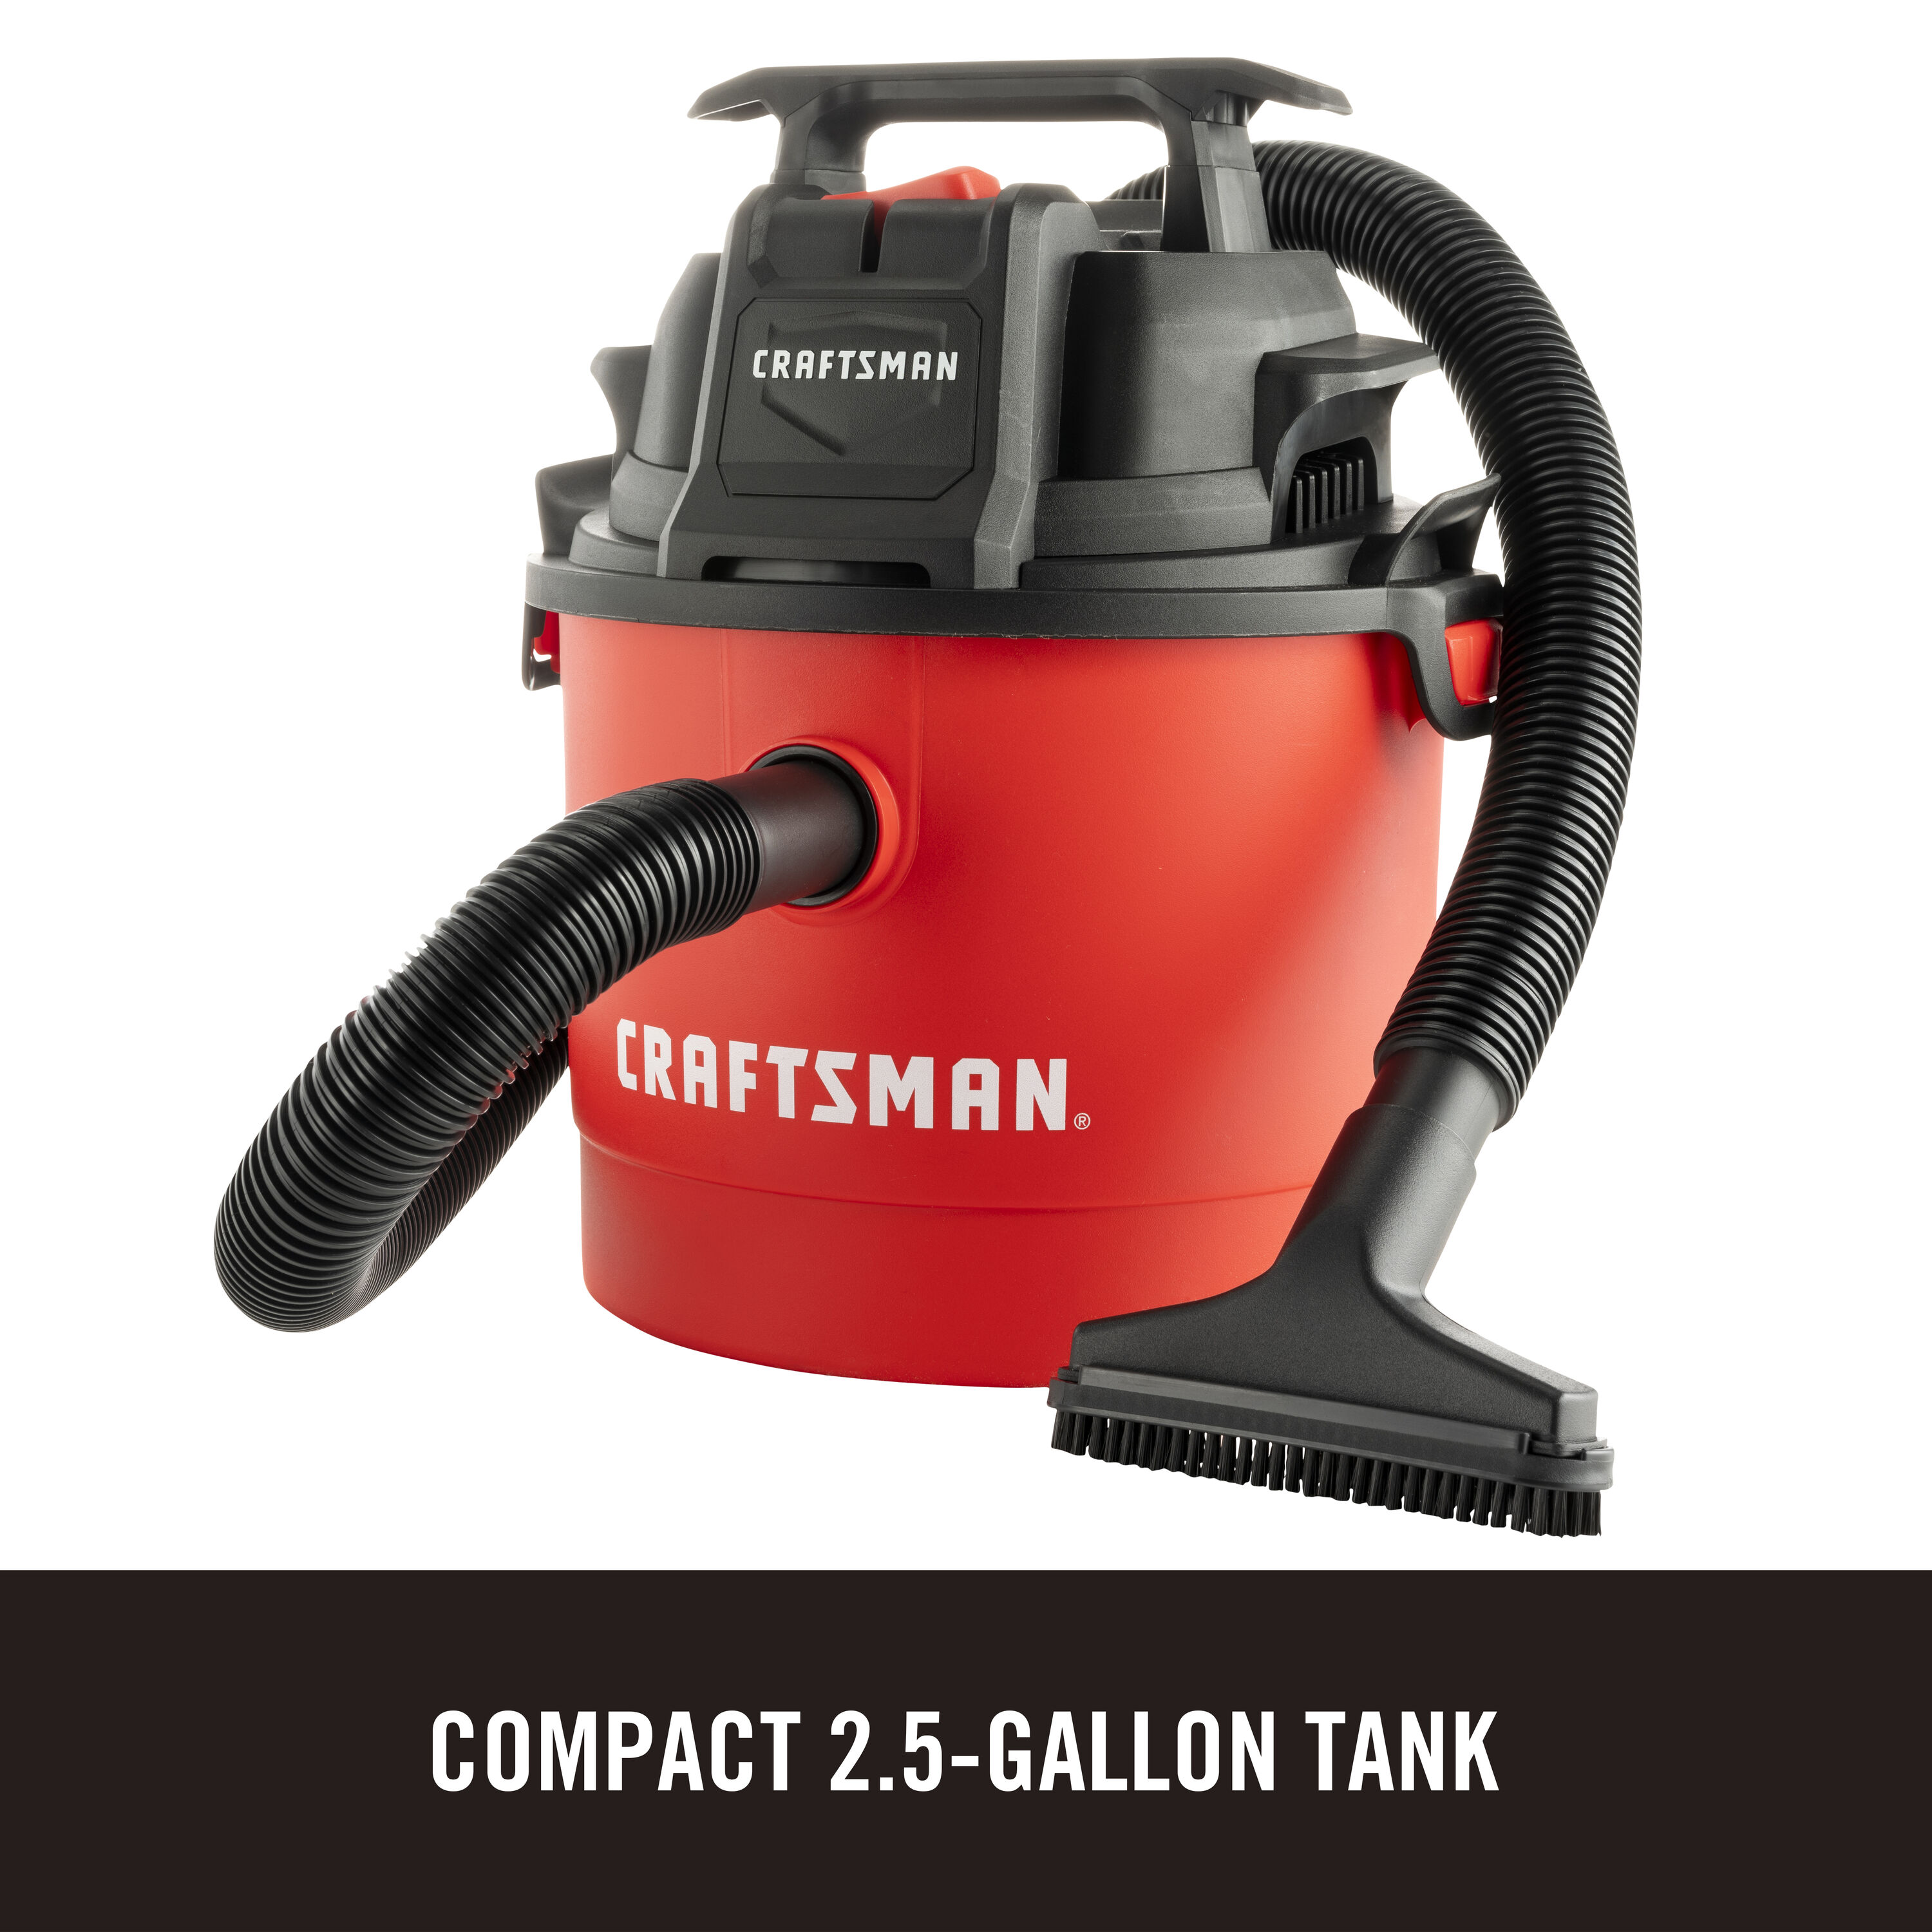 CRAFTSMAN Bonus 12V Car Vacuum 16-Gallons 6.5-HP Corded Wet/Dry Shop Vacuum  with Accessories Included in the Shop Vacuums department at